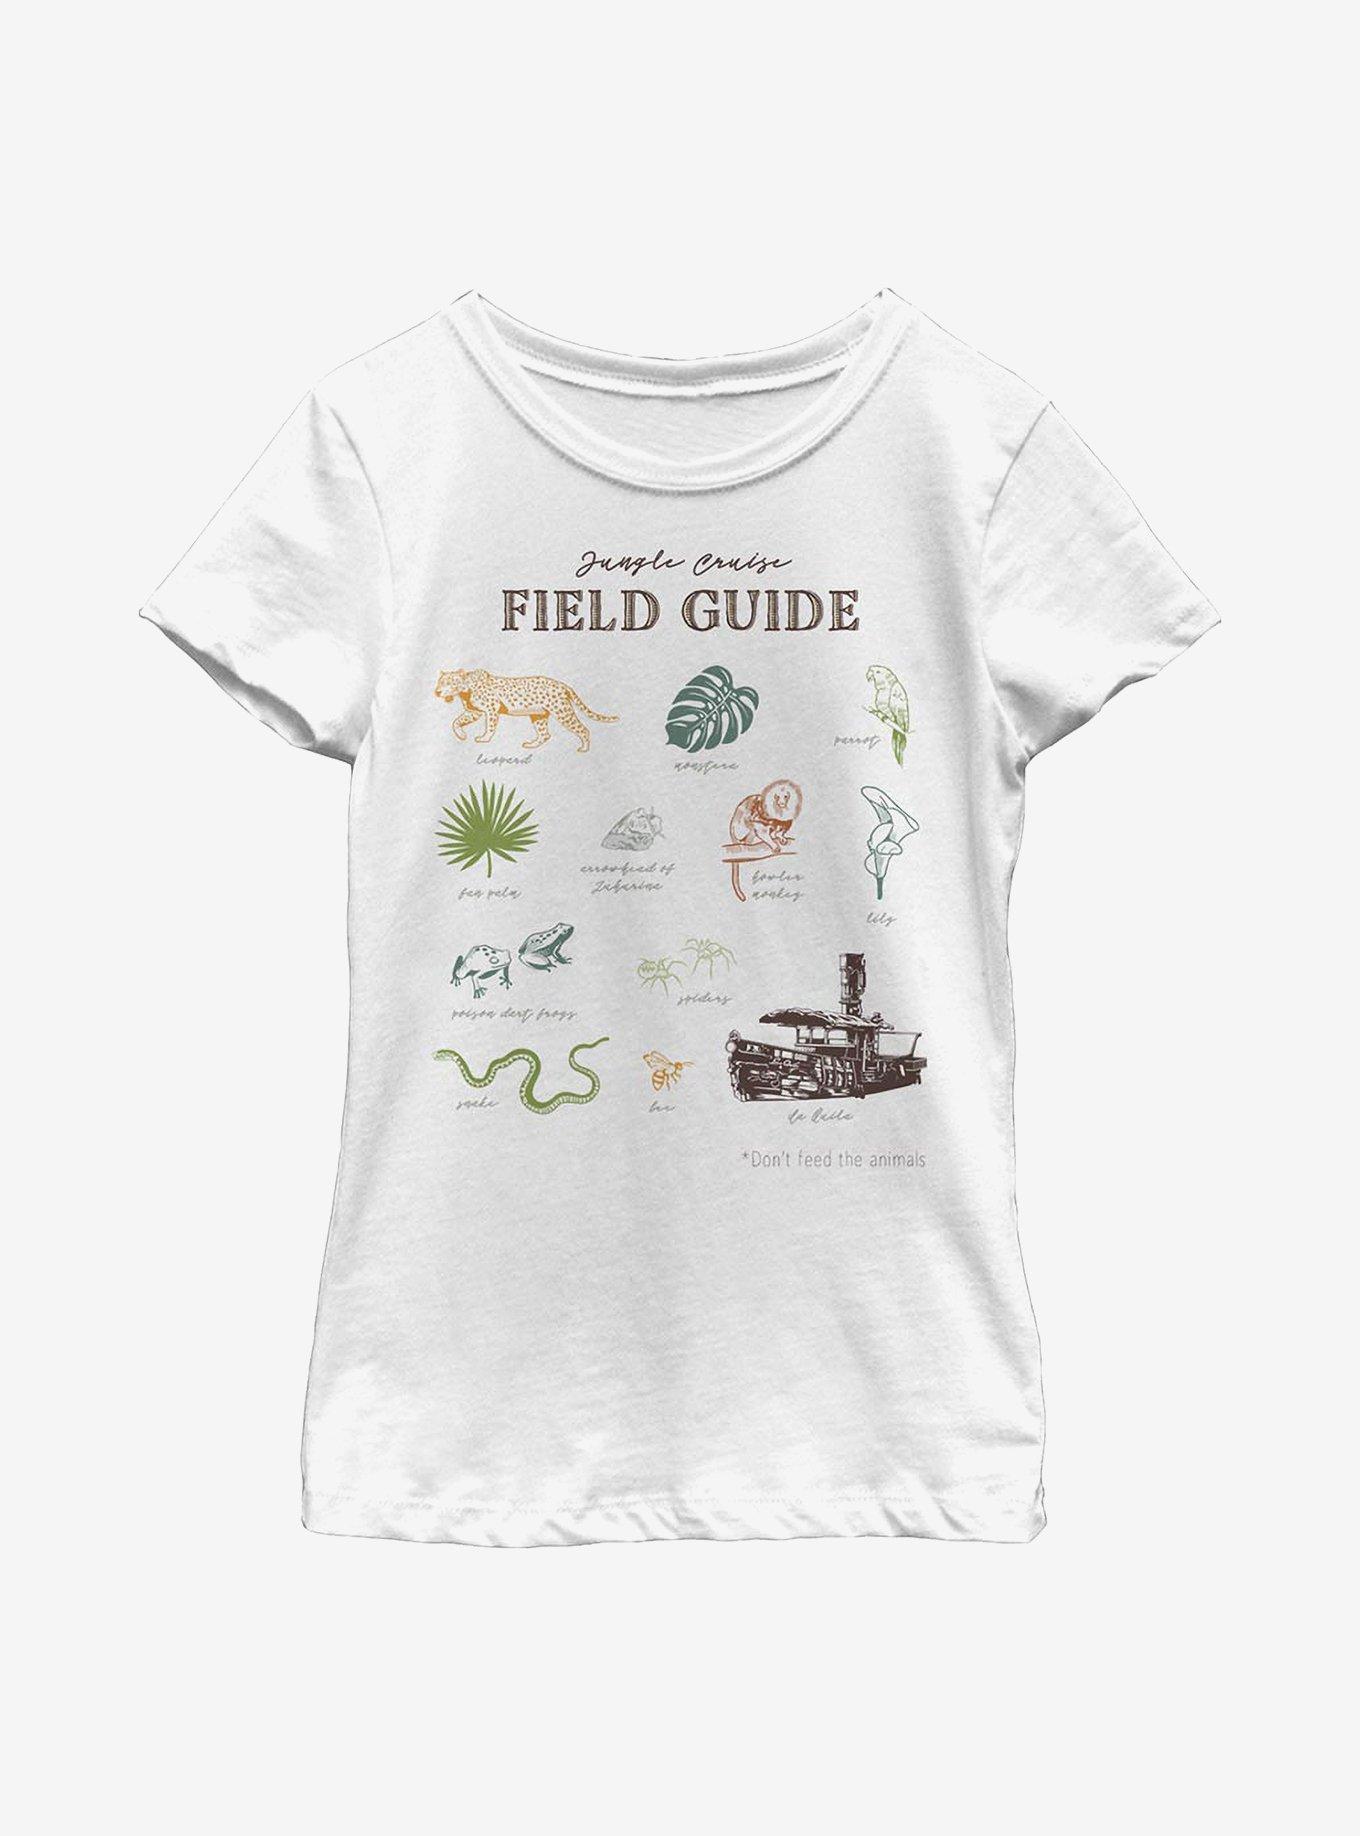 Disney Jungle Cruise Field Guide Youth Girls T-Shirt, WHITE, hi-res